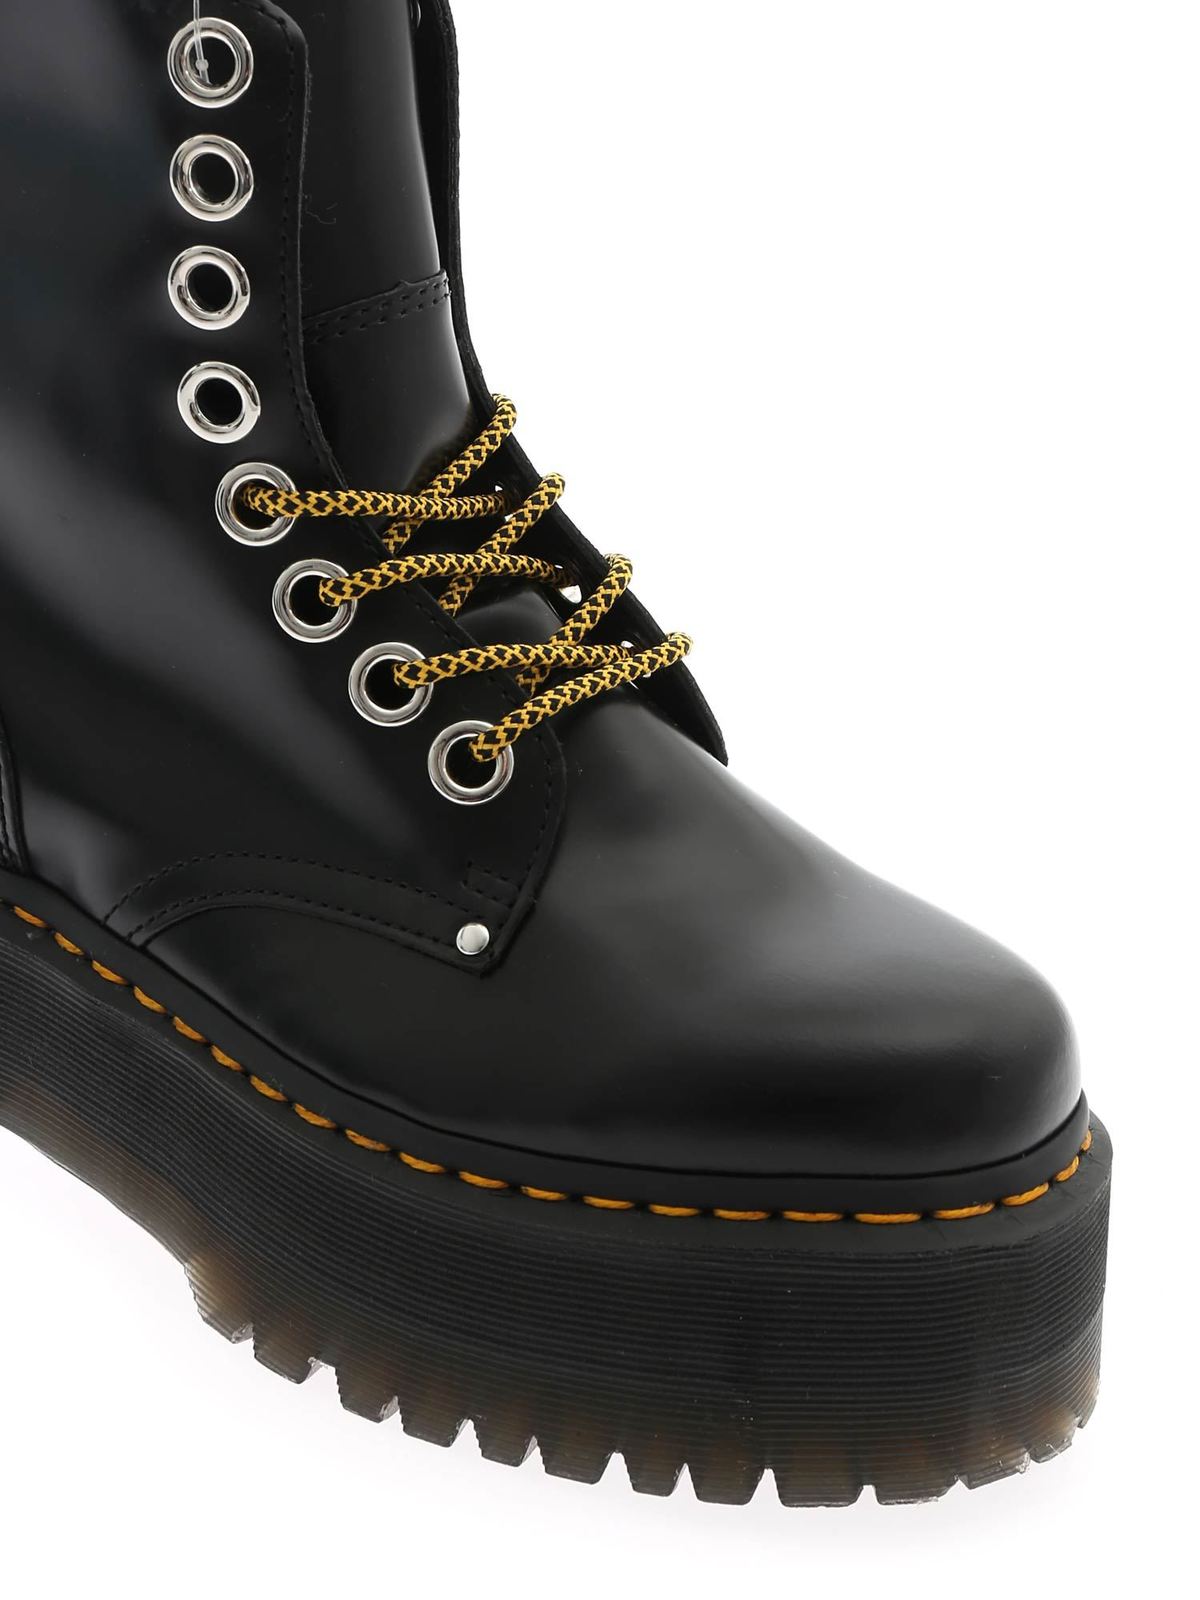 Boots Dr. Martens - Jadon Max Buttero ankle boots in black - 25566001